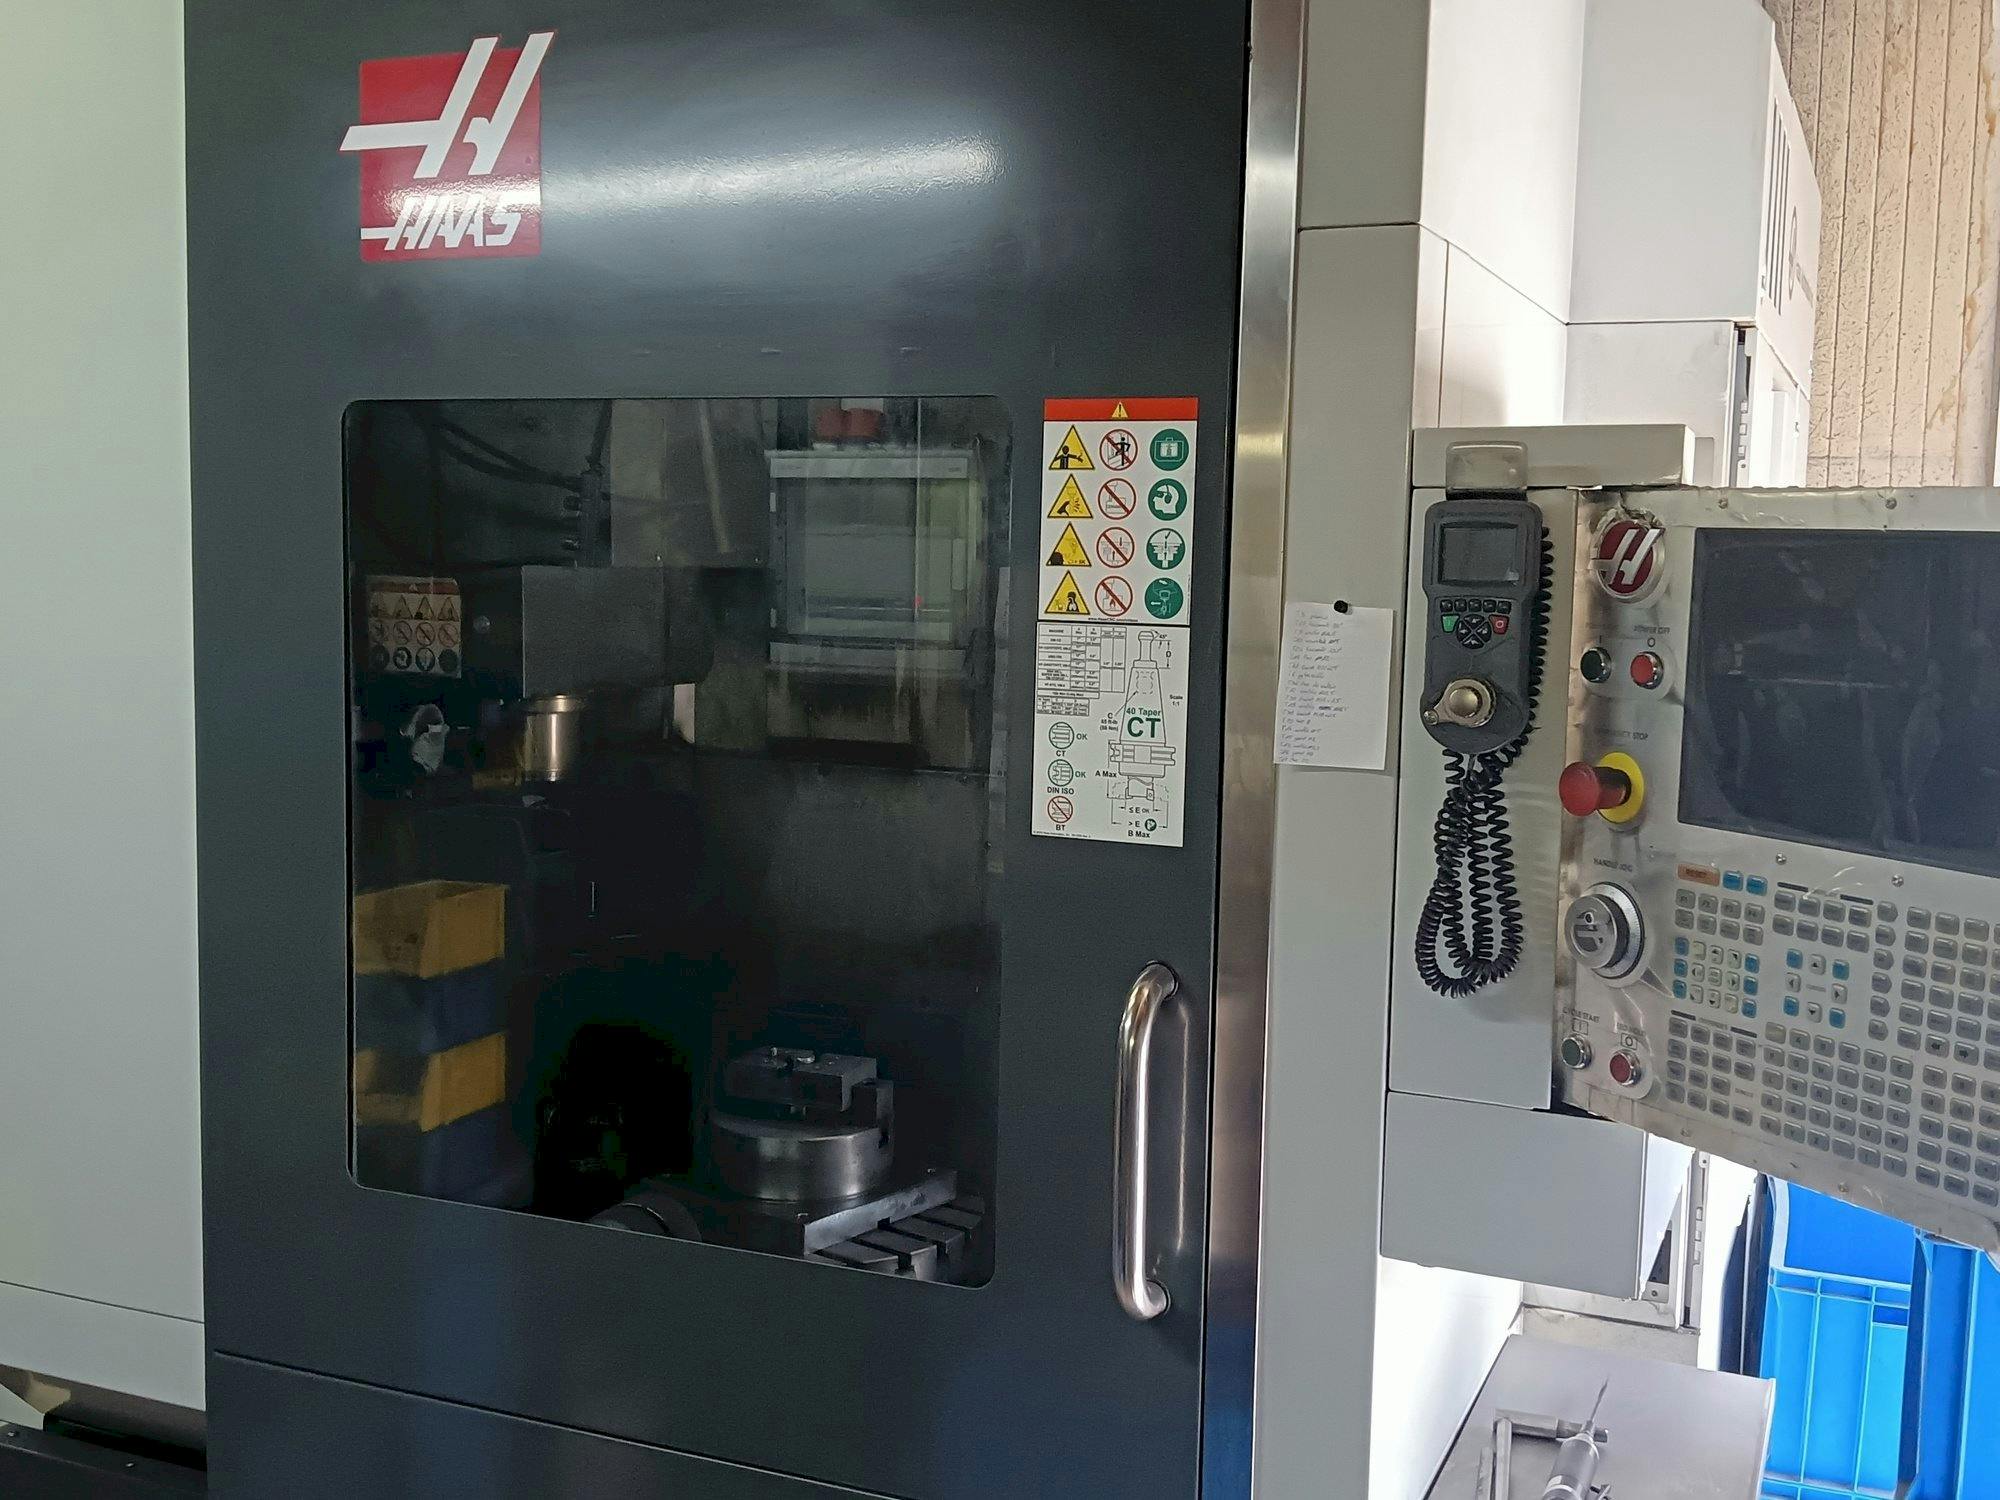 Front view of HAAS UMC 750  machine